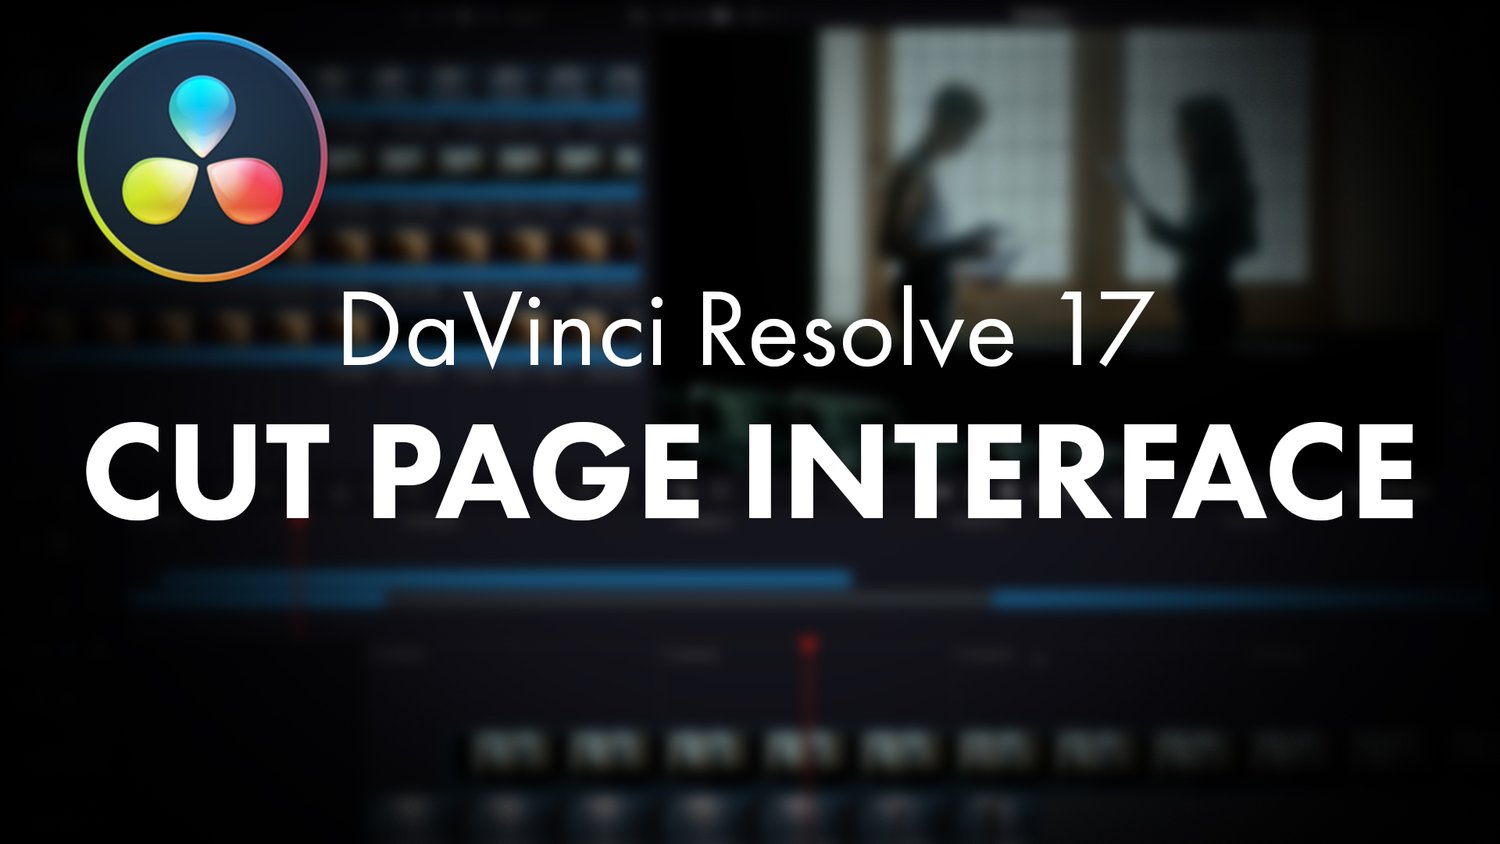 Cut Page Interface - Getting Started in DaVinci Resolve (Part 4) — Daniel  Grindrod